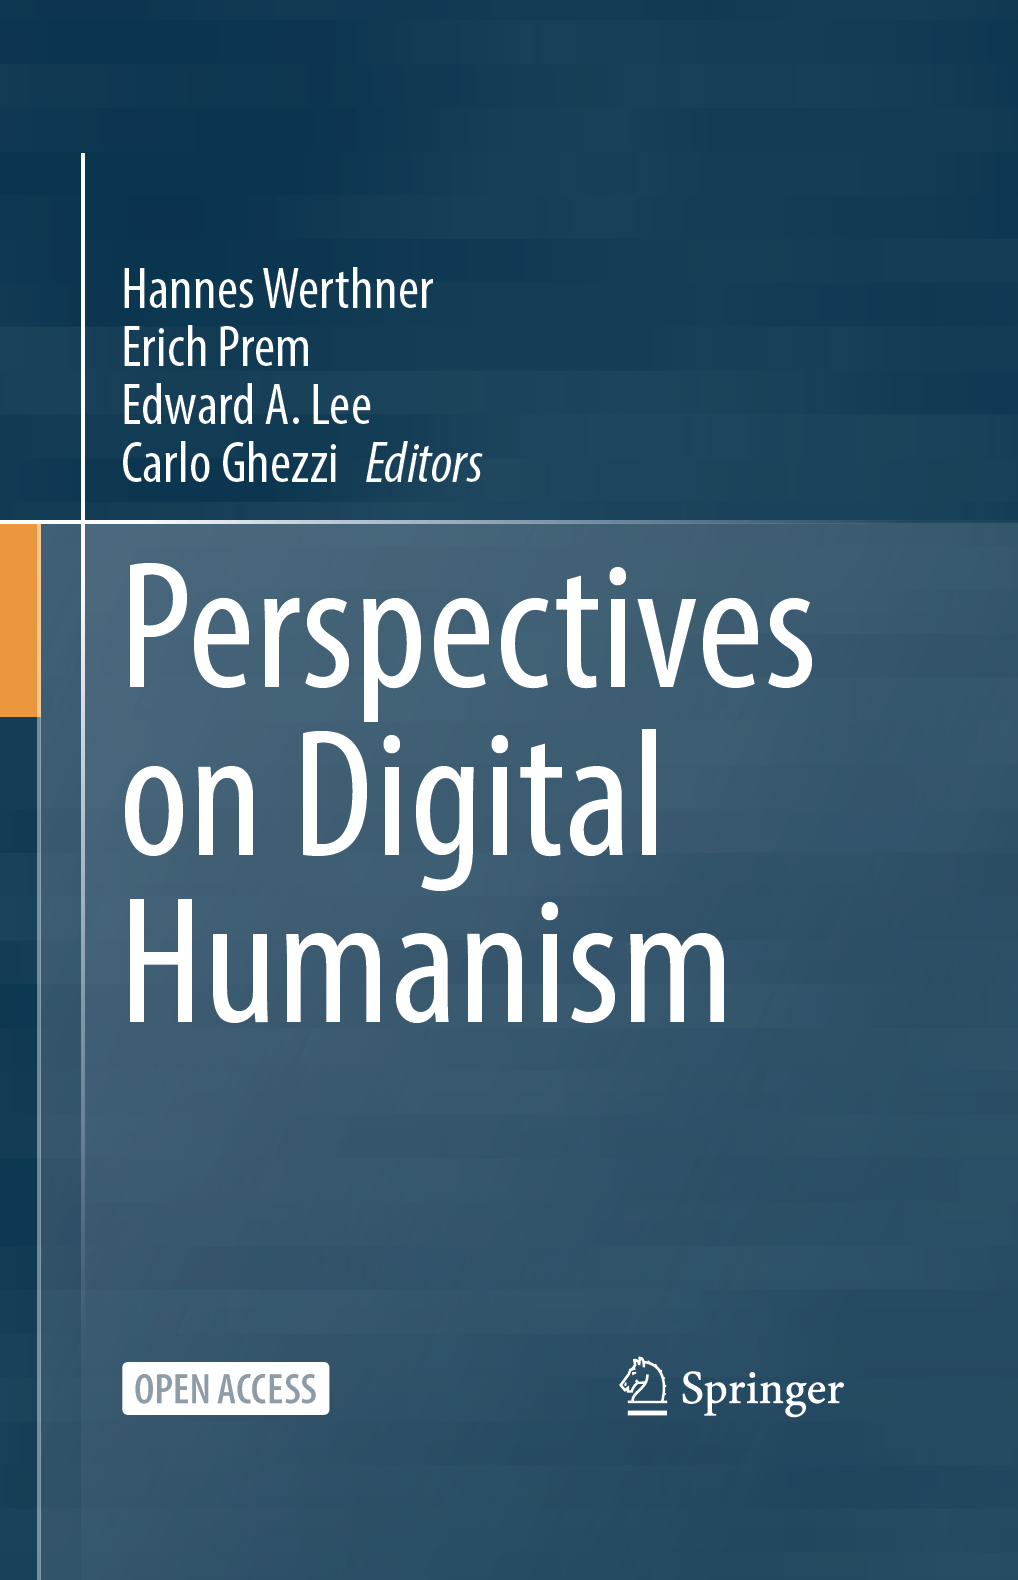 Perspectives on Digital Humanism Book cover